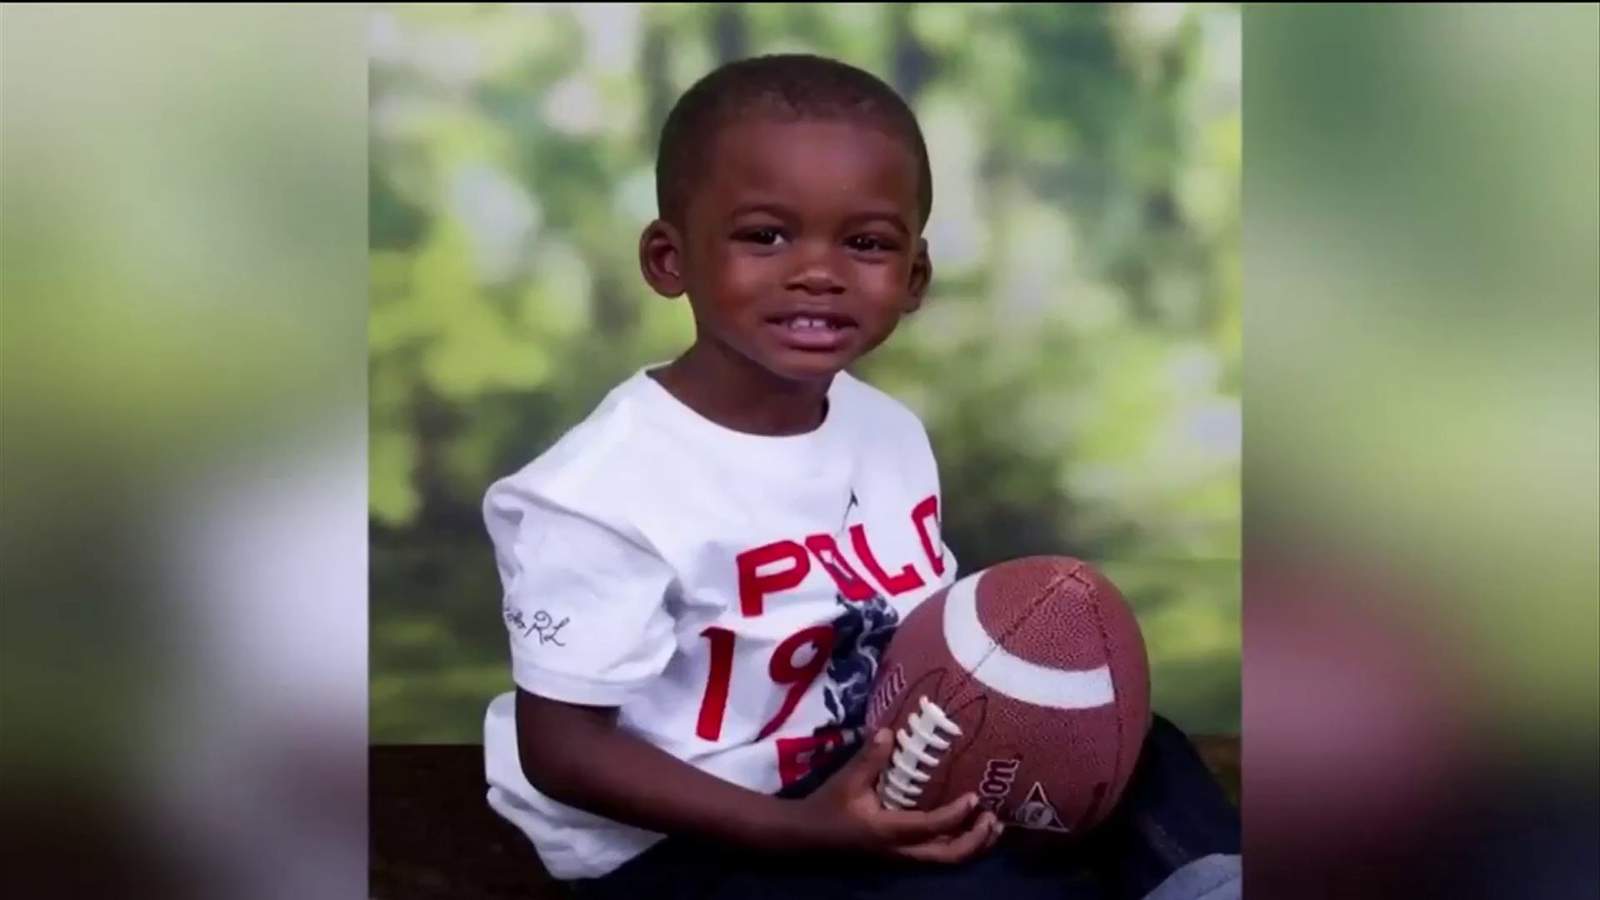 Arlington playground named after boy who drowned in a septic tank